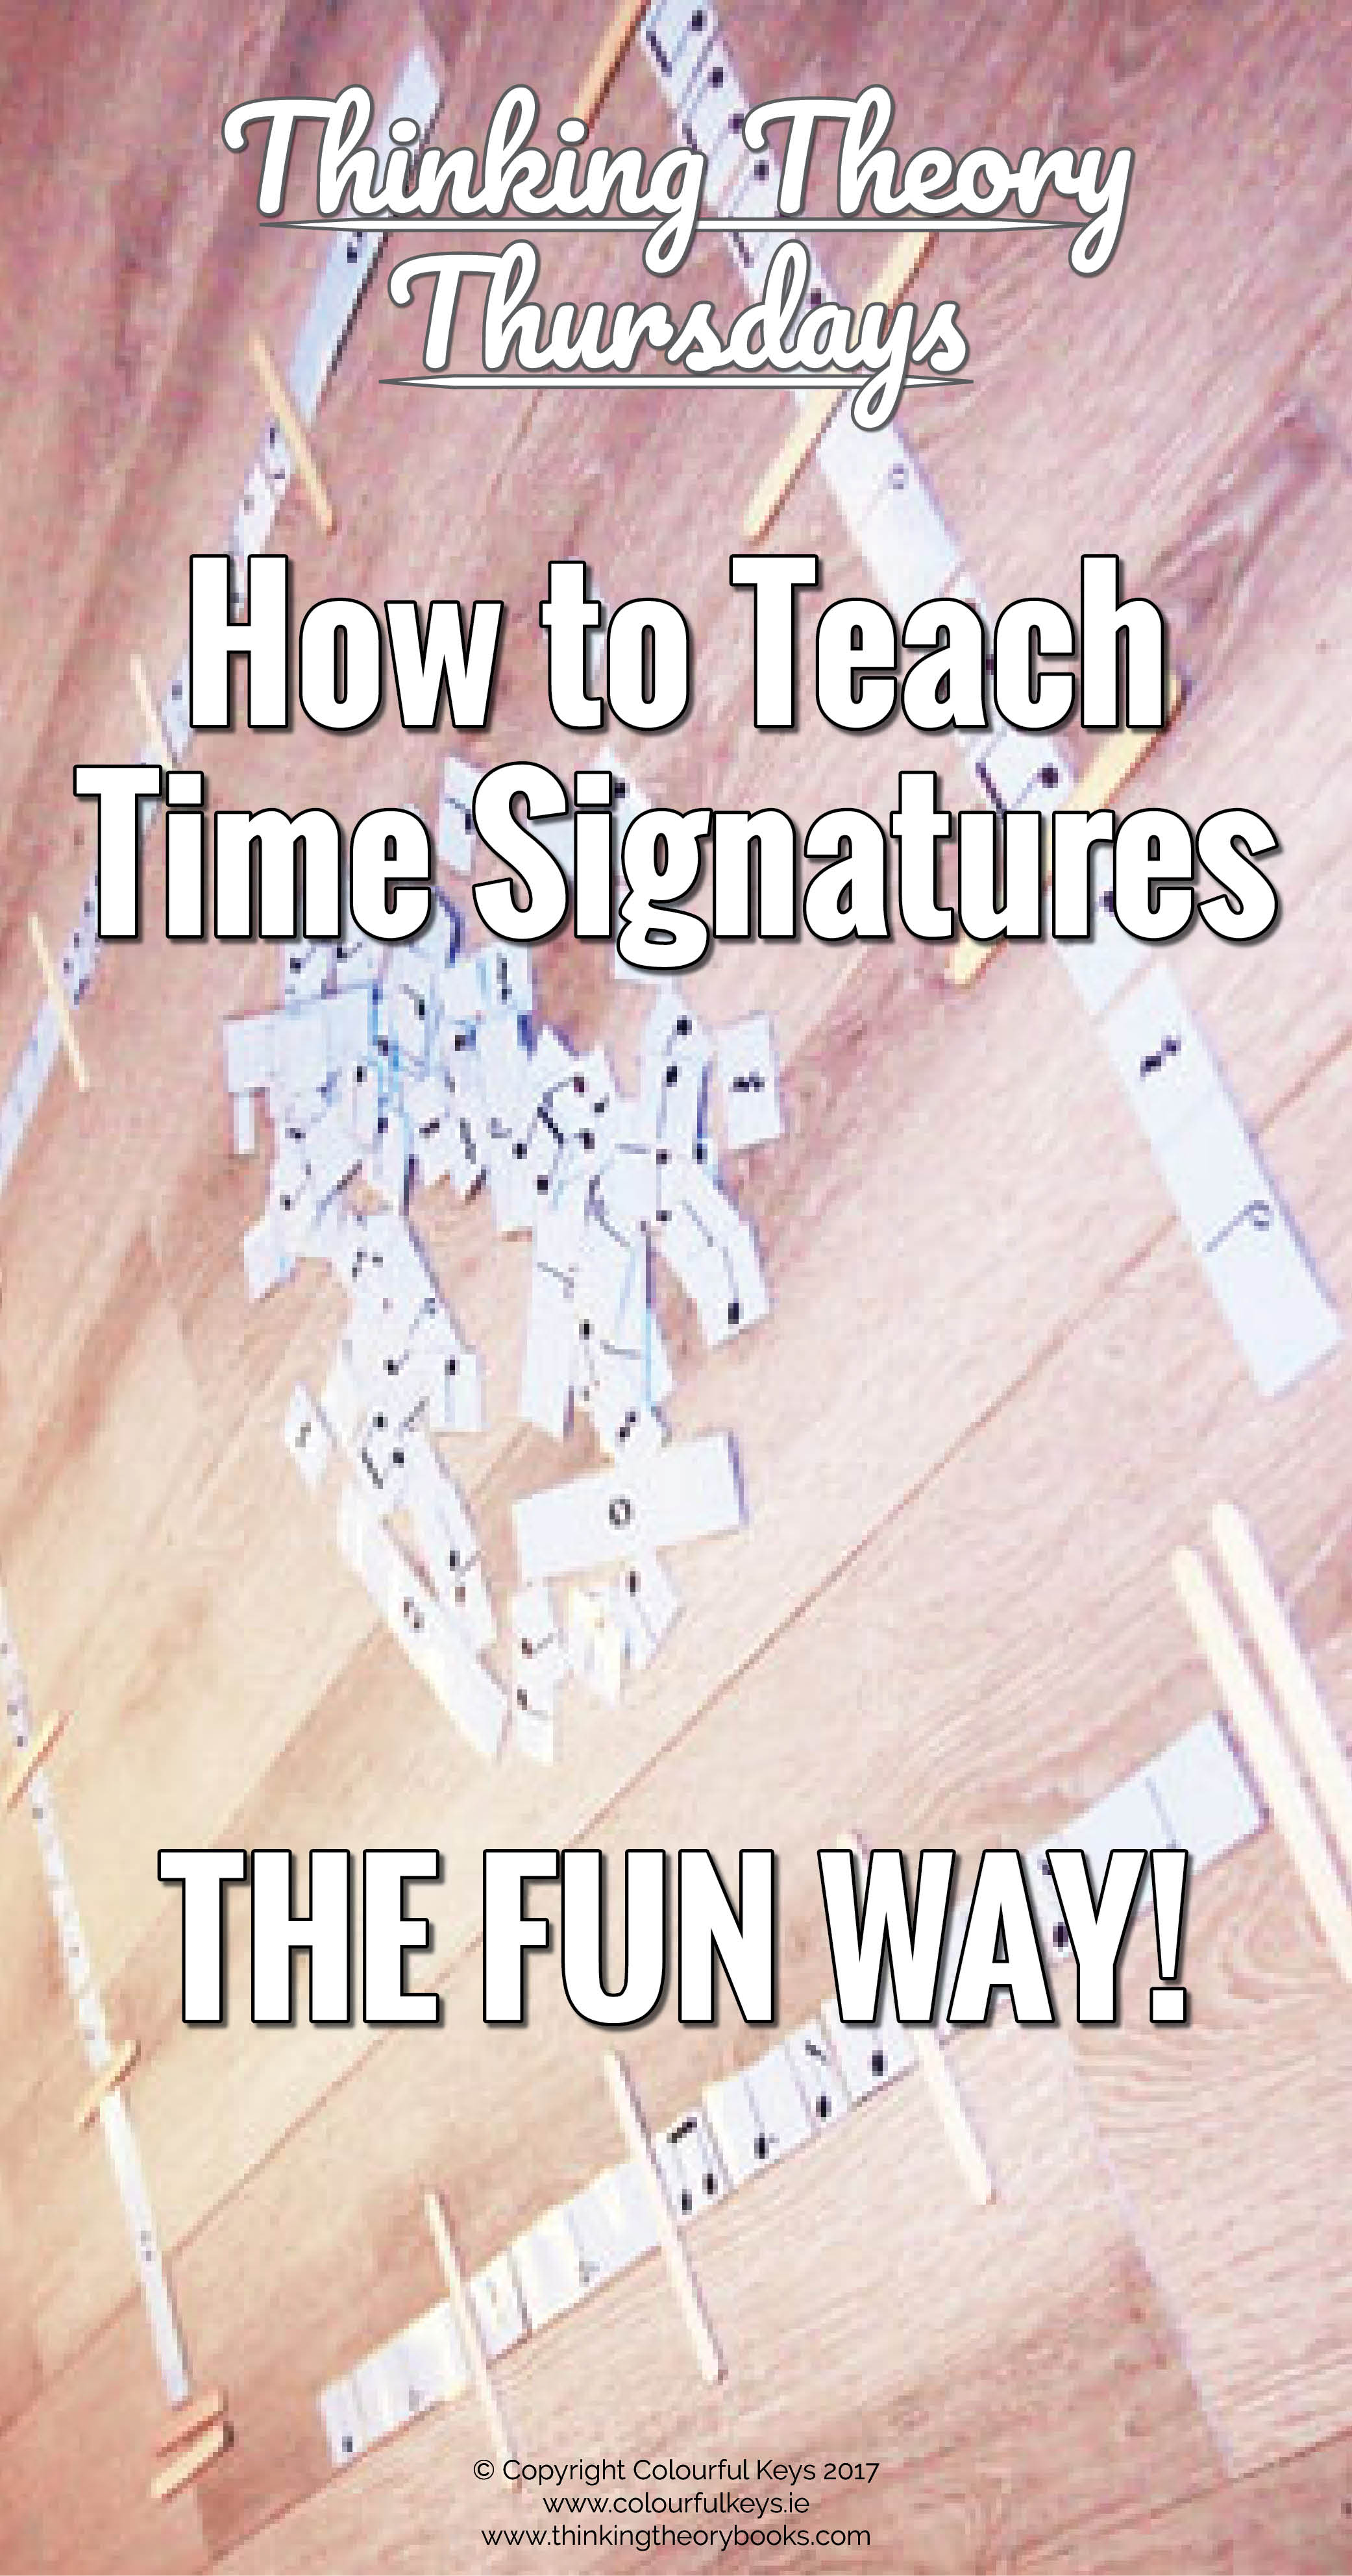 How to teach time signatures the fun way